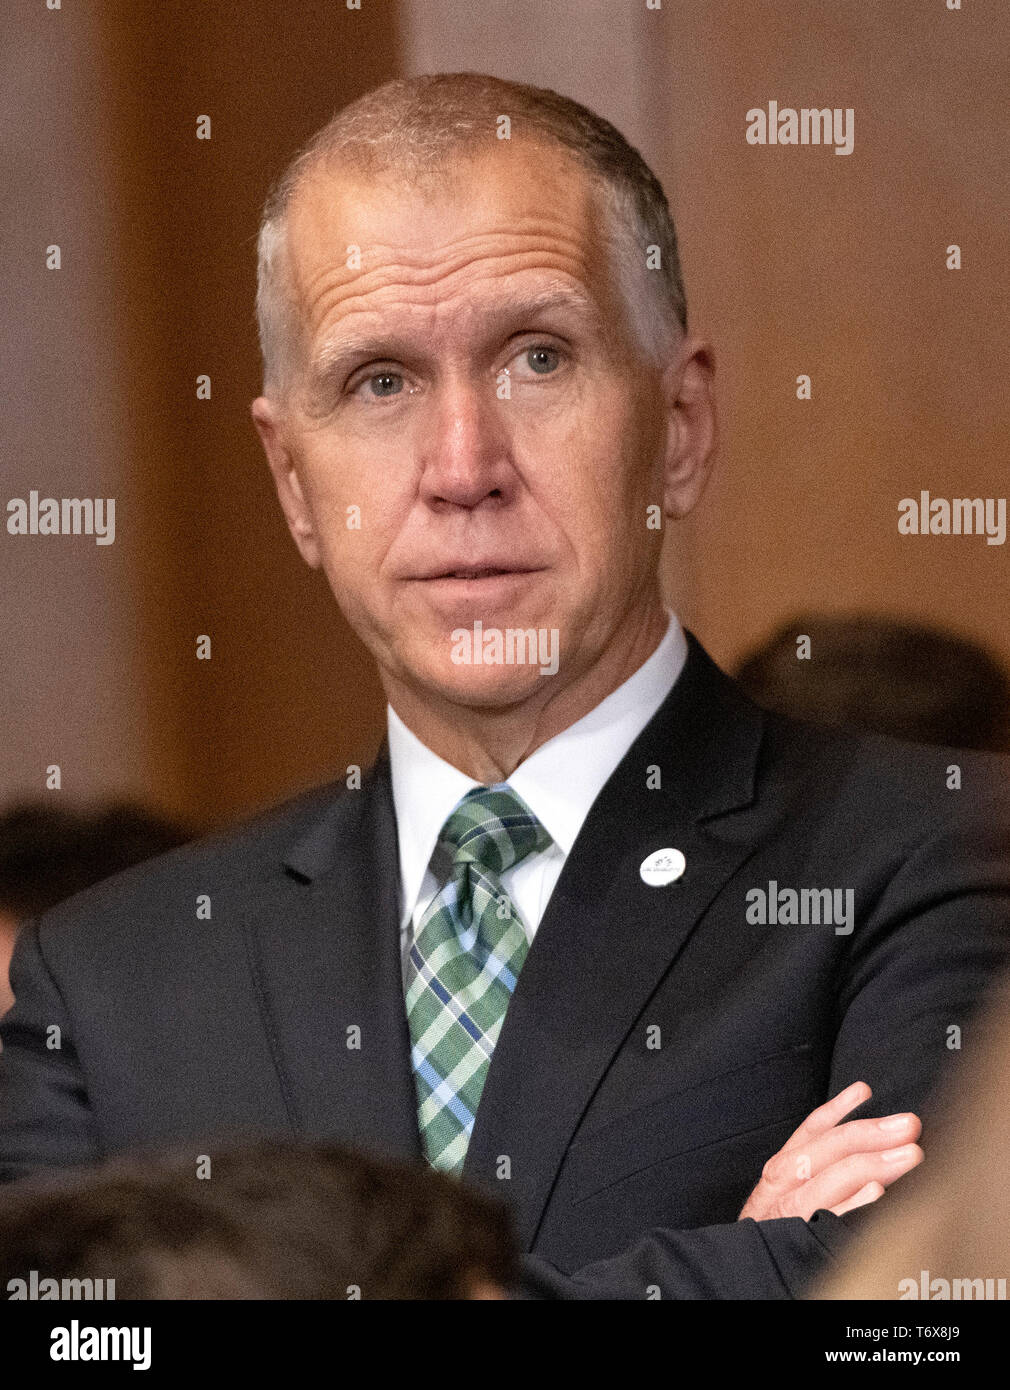 United States Senator Thom Tillis (Republican of North Carolina) looks on from the back of the room as US Attorney General William P. Barr testifies before the US Senate Committee on the Judiciary on the “Department of Justice's Investigation of Russian Interference with the 2016 Presidential Election” on Capitol Hill in Washington, DC on May 1, 2019. The hearing will begin to answer questions about how the DOJ handled the conclusions from the Mueller probe. Credit: Ron Sachs/CNP (RESTRICTION: NO New York or New Jersey Newspapers or newspapers within a 75 mile radius of New York City) | usa Stock Photo